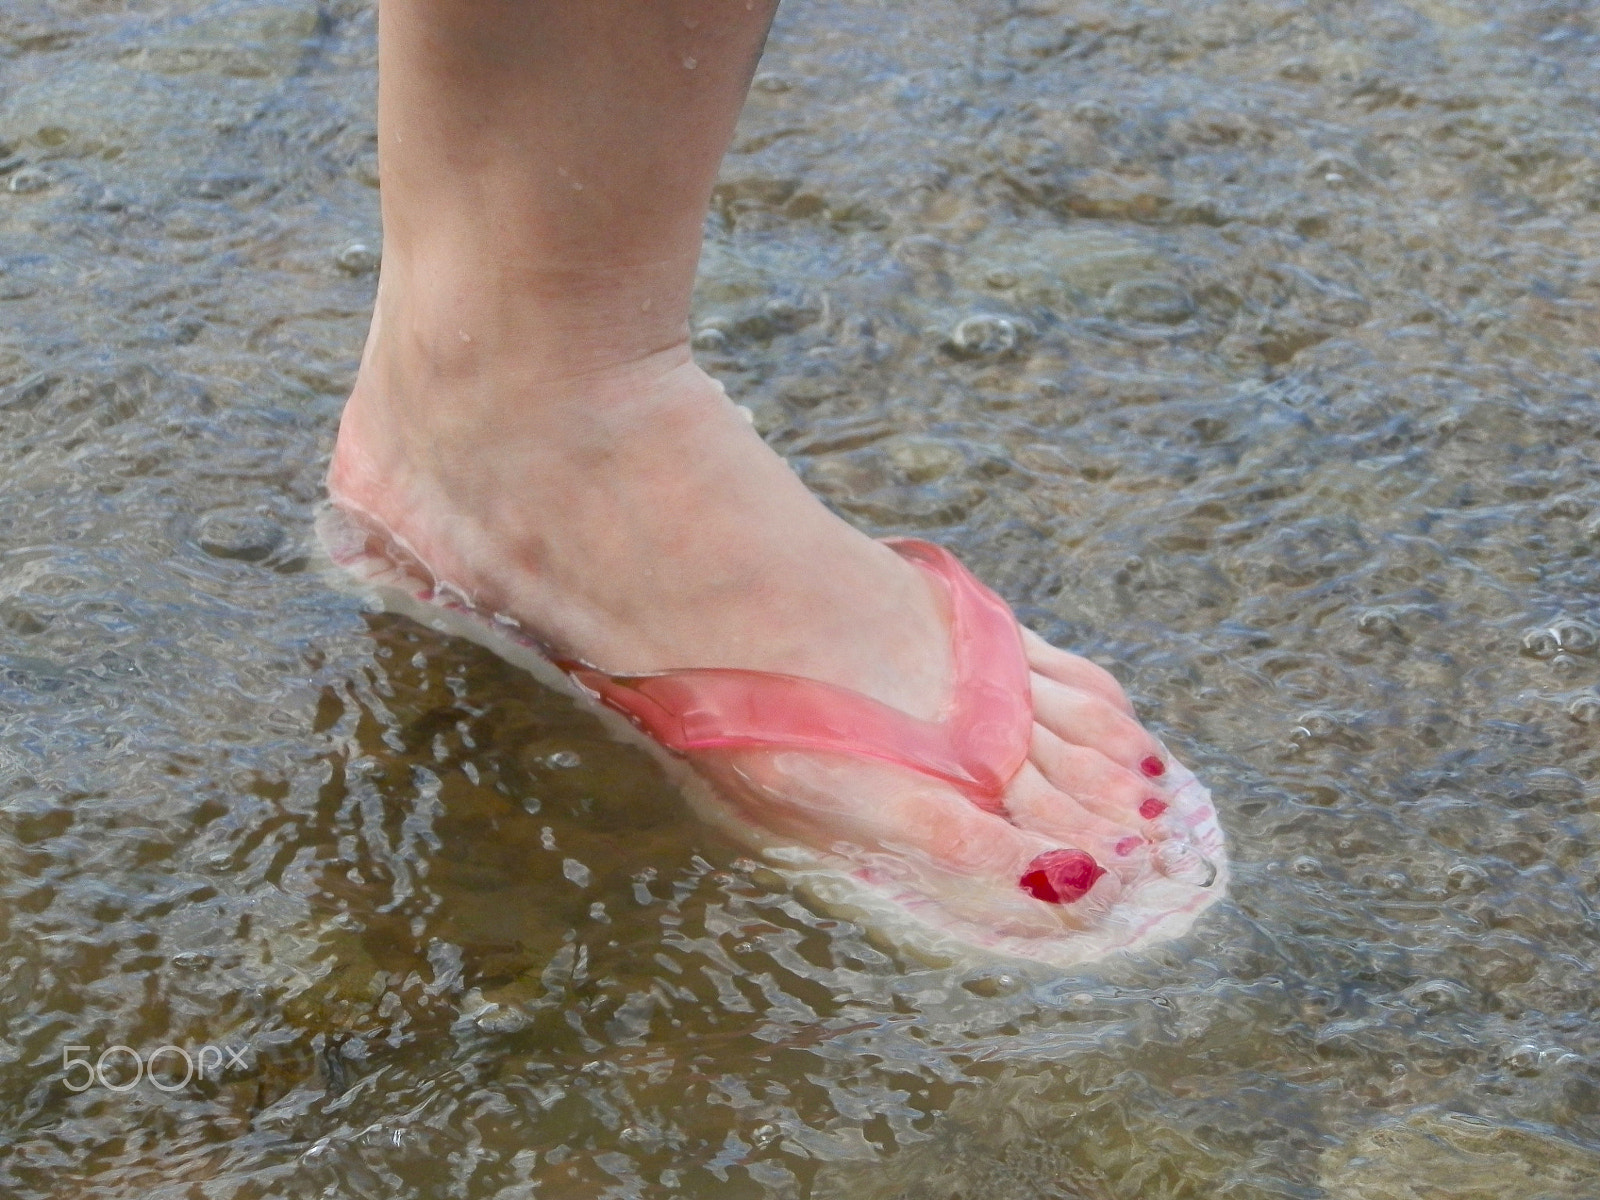 Olympus SZ-10 sample photo. Foot in the water photography